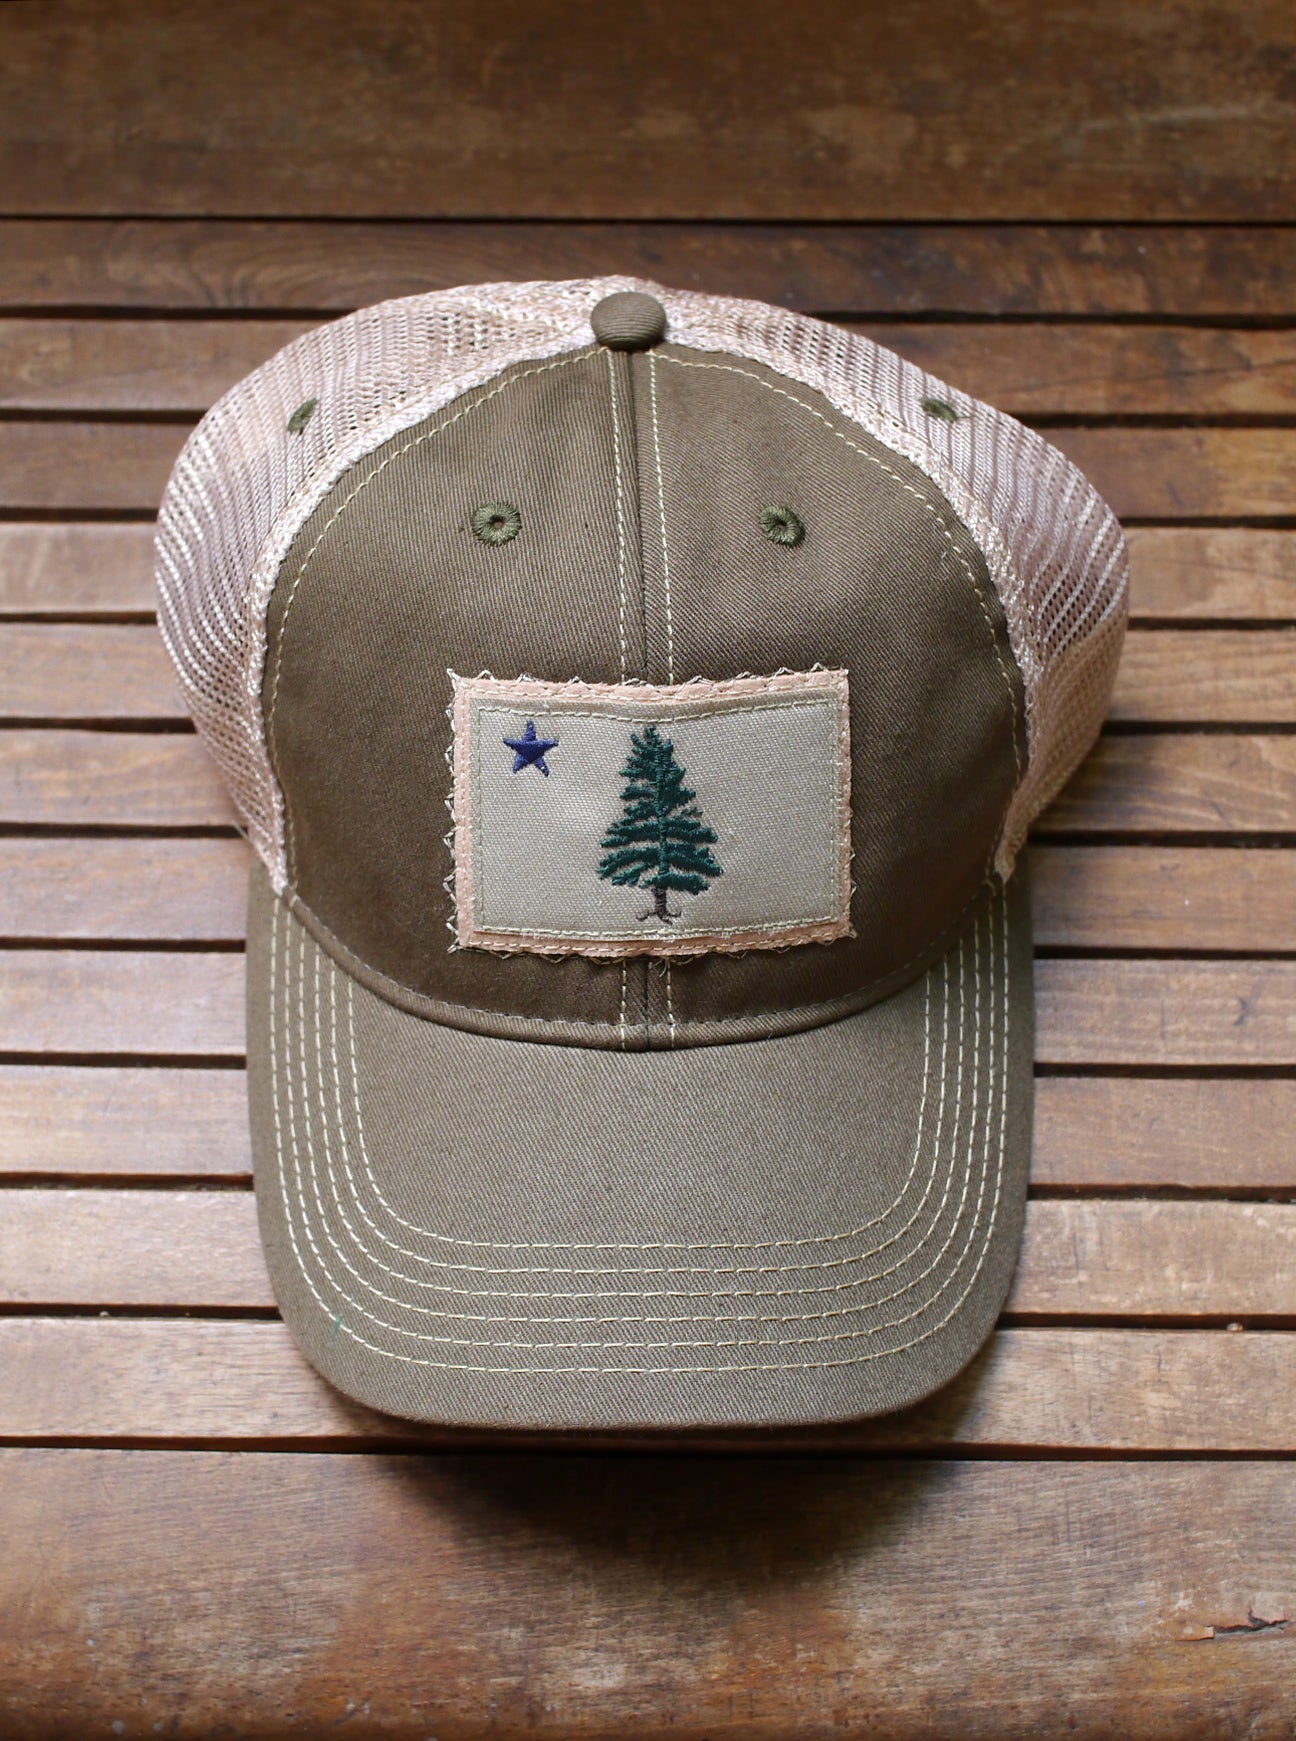 1901 Maine Flag trucker hat is artfully distressed for that lived-in look and feel. Olive trucker hat with tan back mesh and Maine flag appliqué on the front center